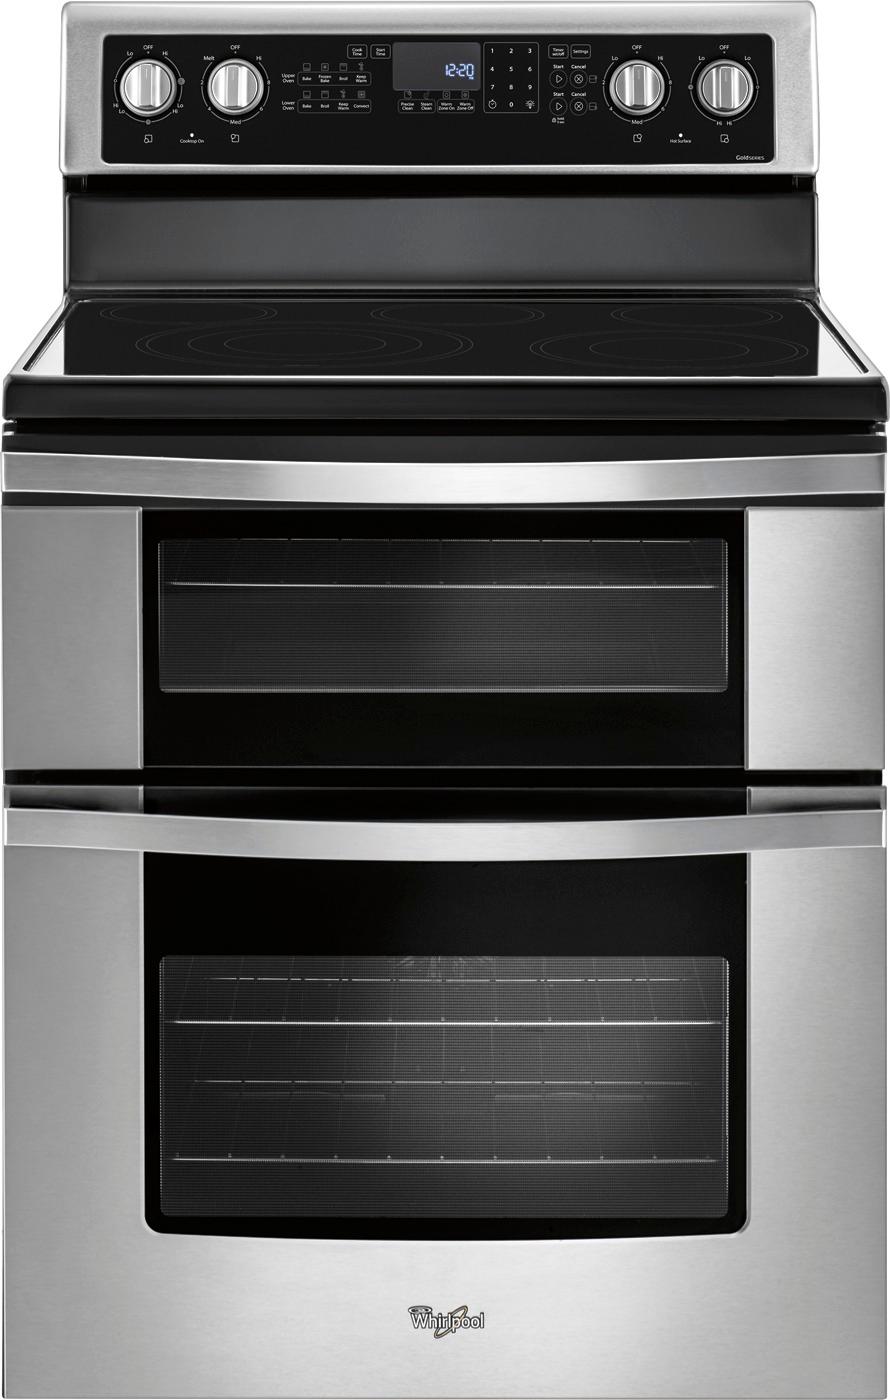 Whirlpool - 6.7 Cu. Ft. Self-Cleaning Freestanding Double Oven Electric Whirlpool Stainless Steel Double Oven